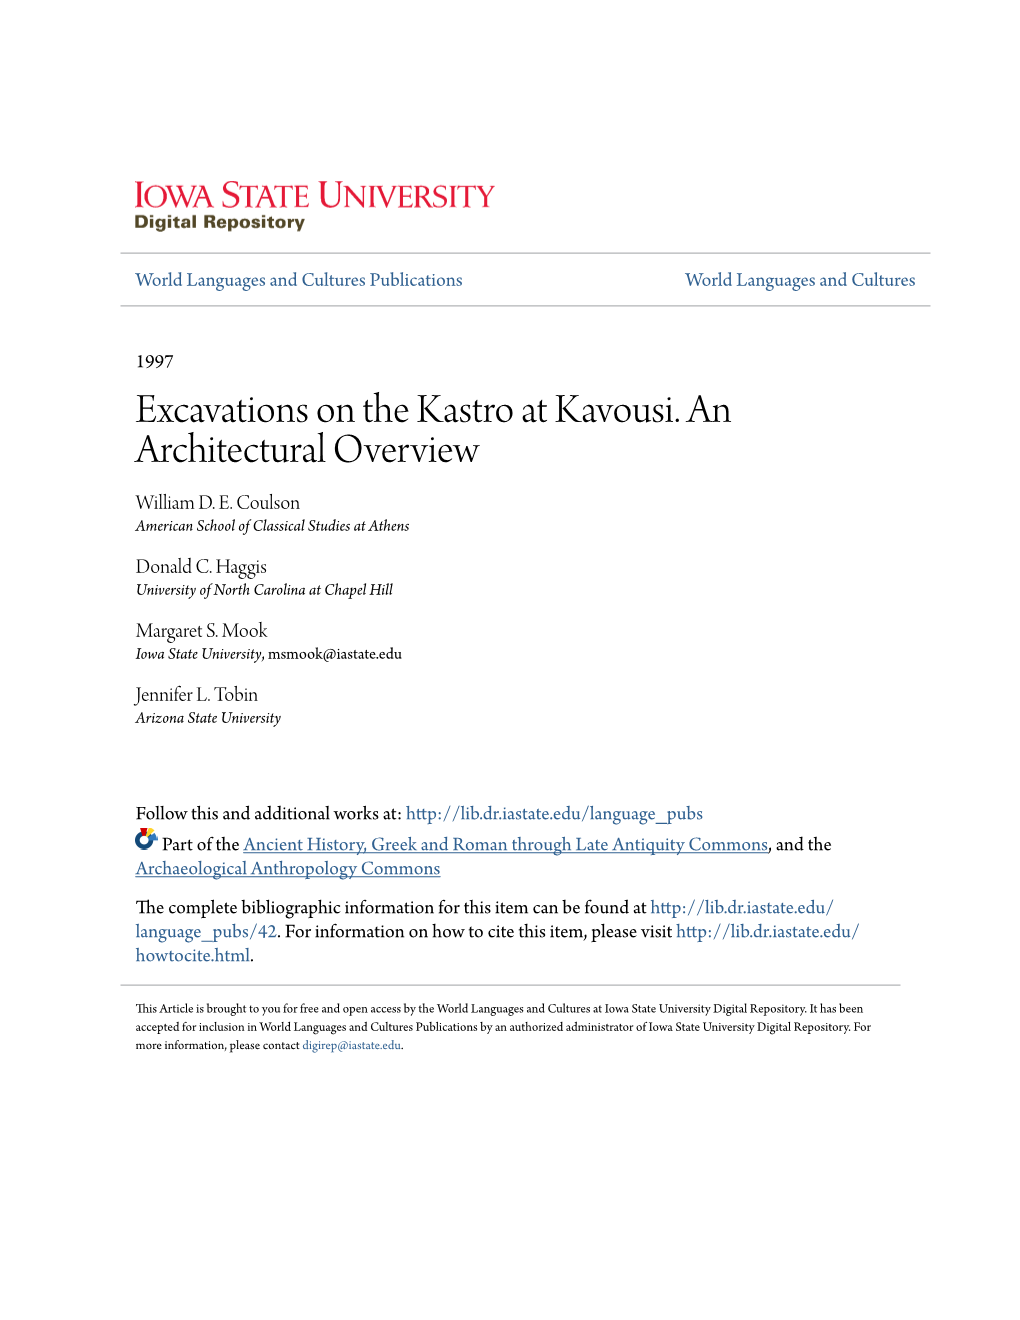 Excavations on the Kastro at Kavousi. an Architectural Overview William D